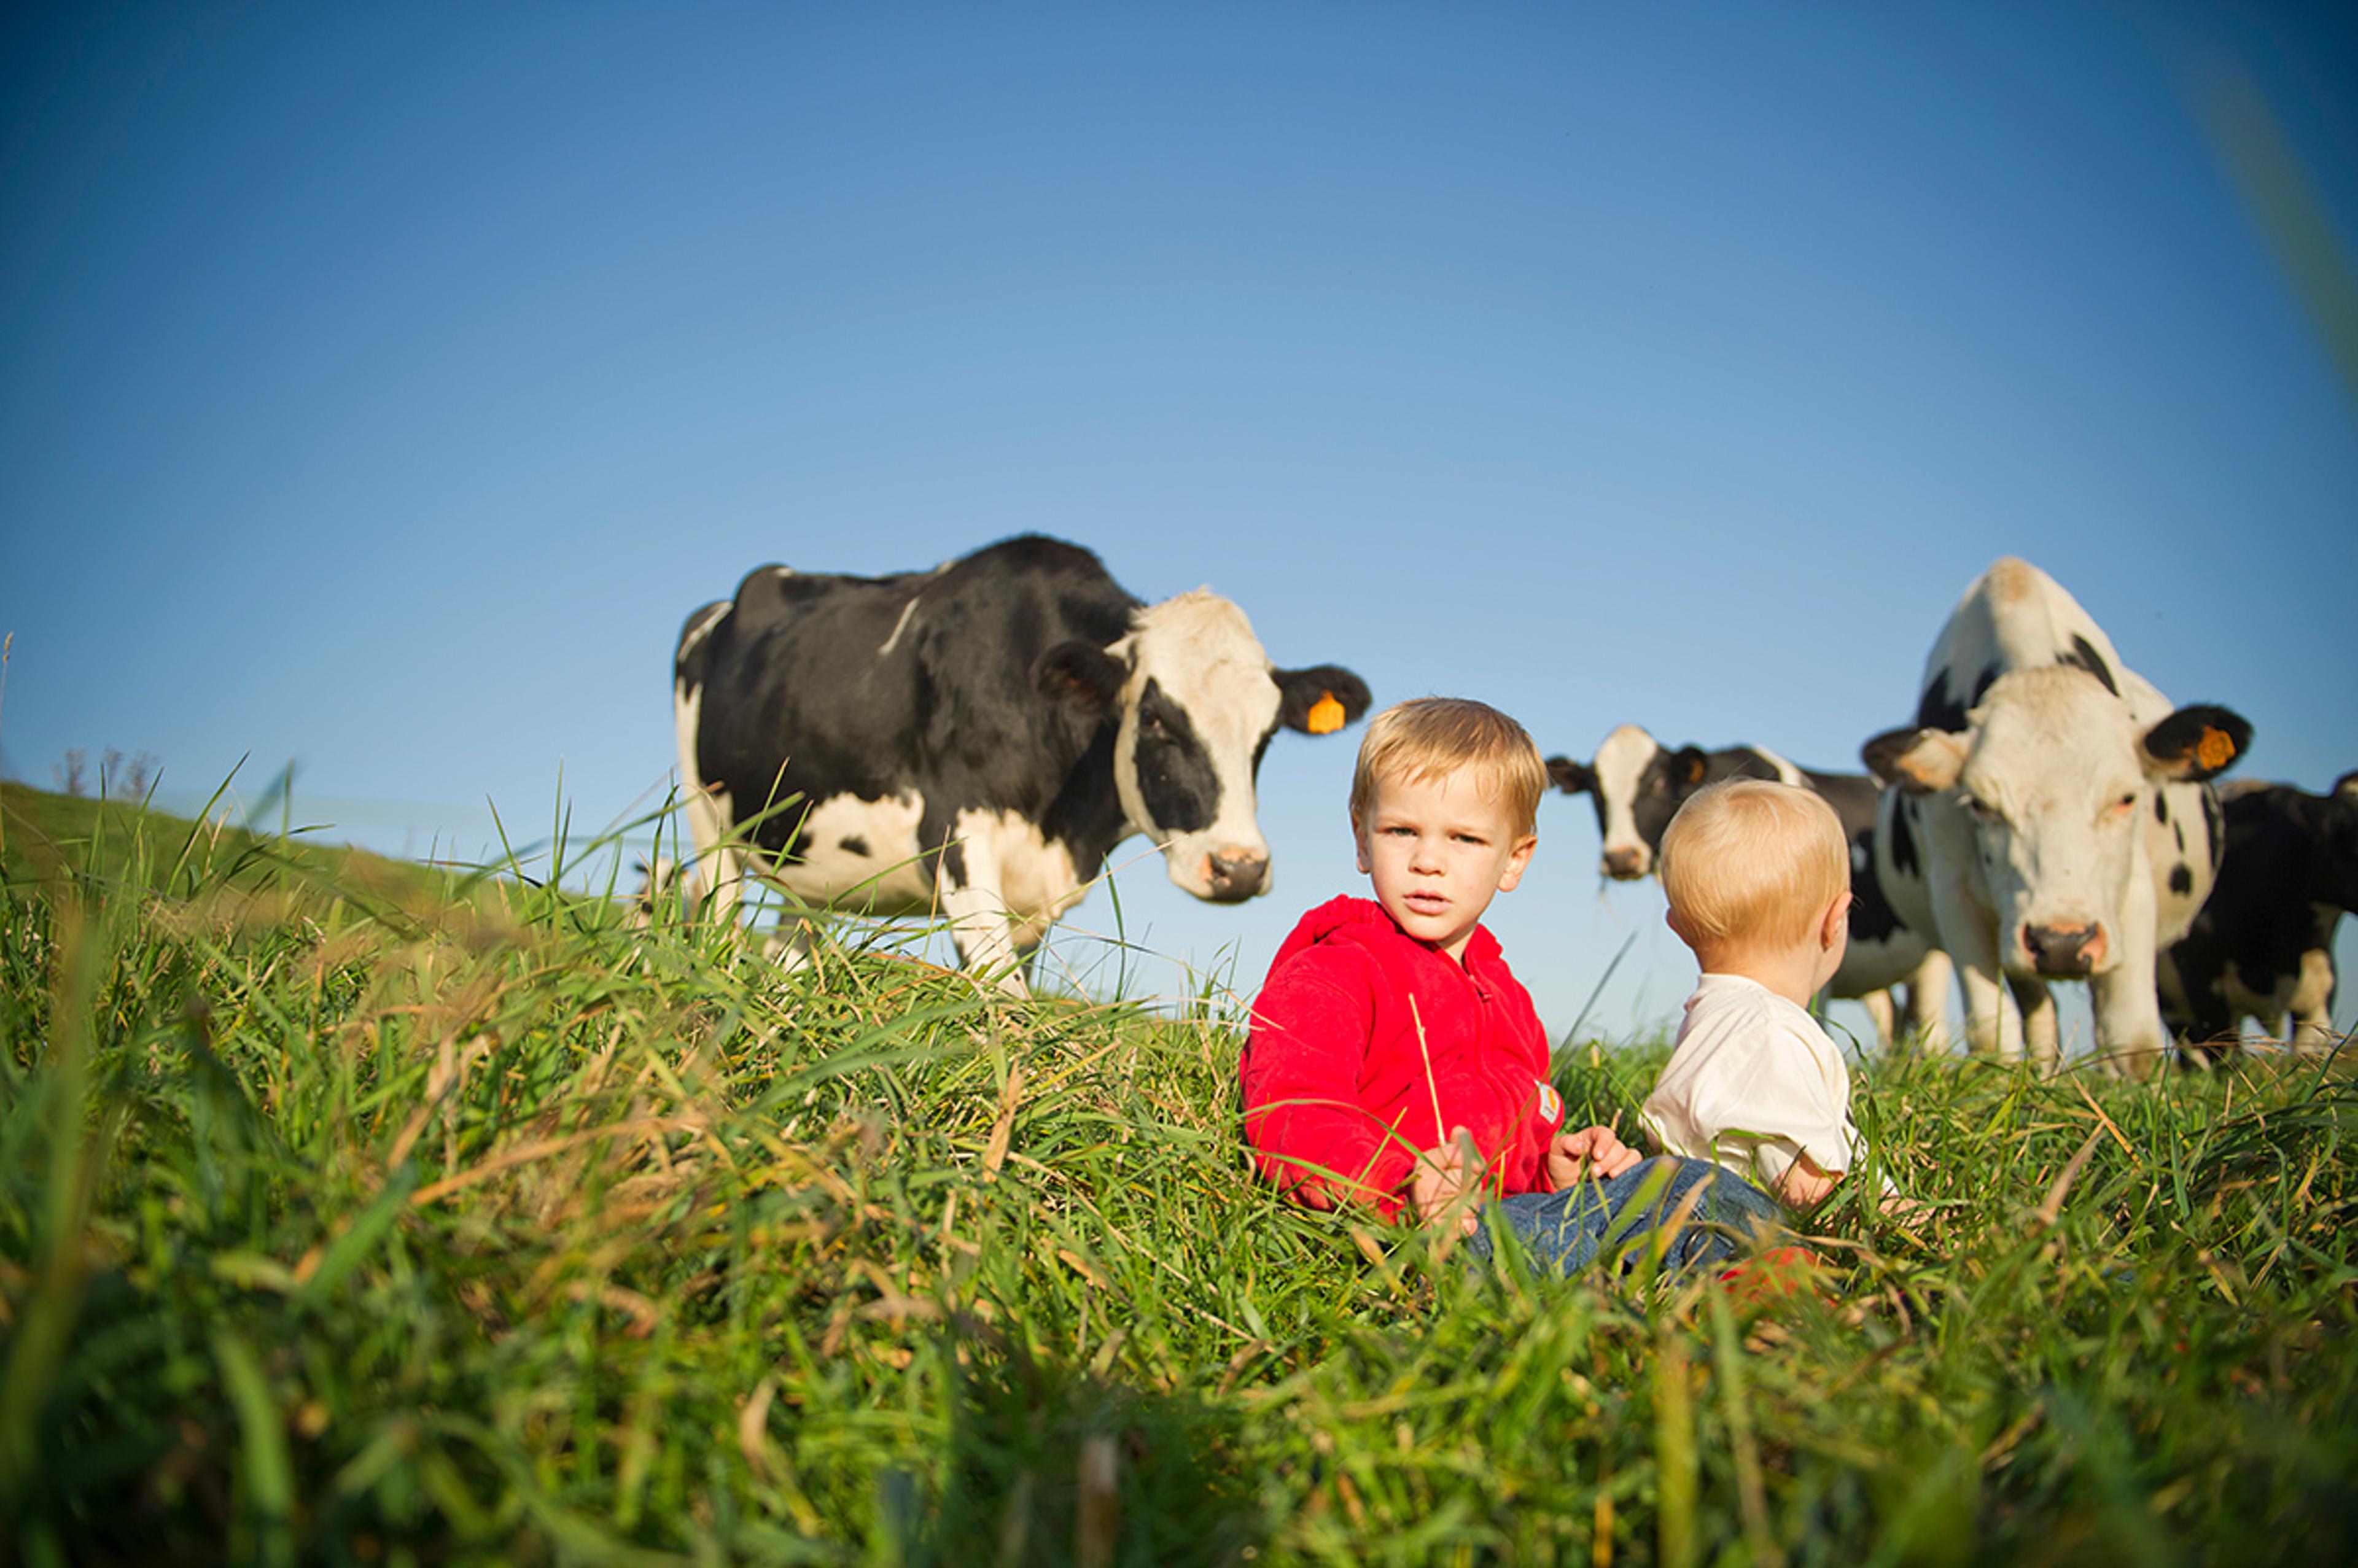 Two little boys sit in the grass and one turns around to look at cows standing behind them. 